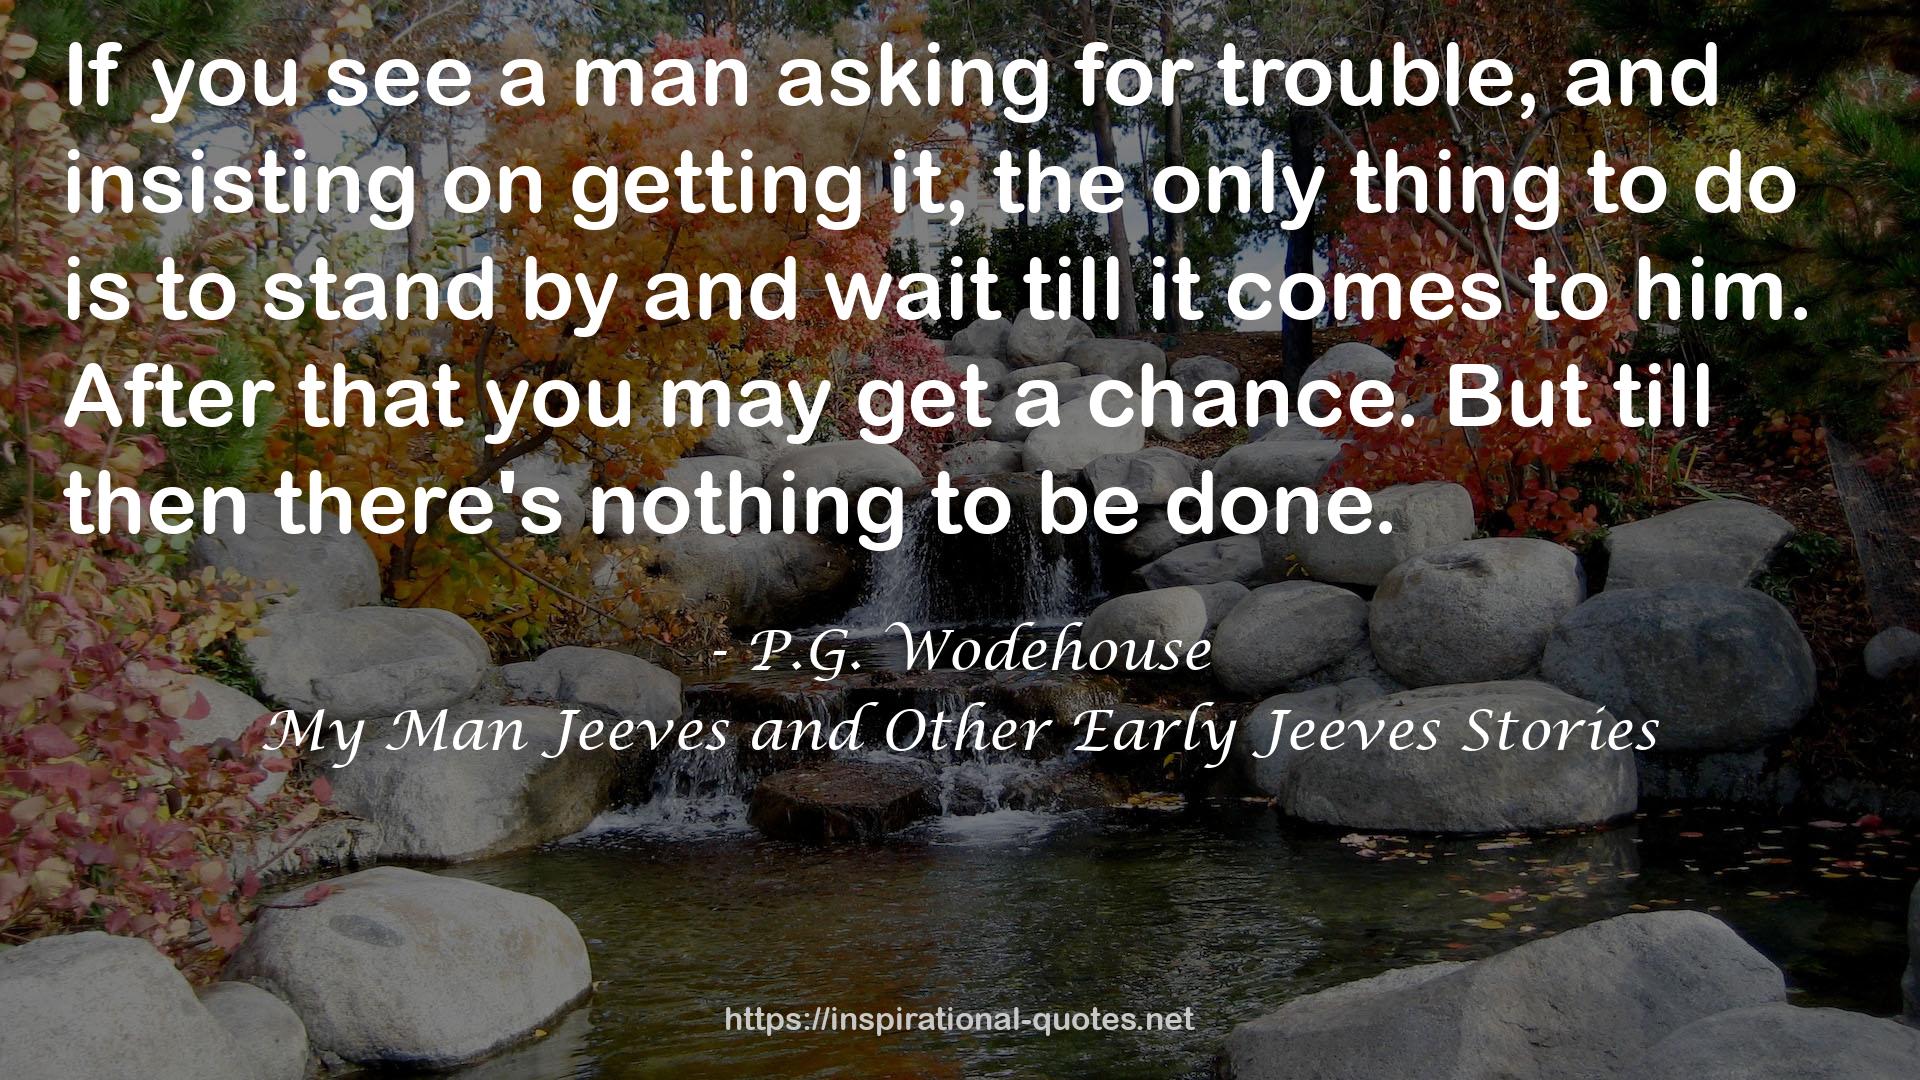 My Man Jeeves and Other Early Jeeves Stories QUOTES